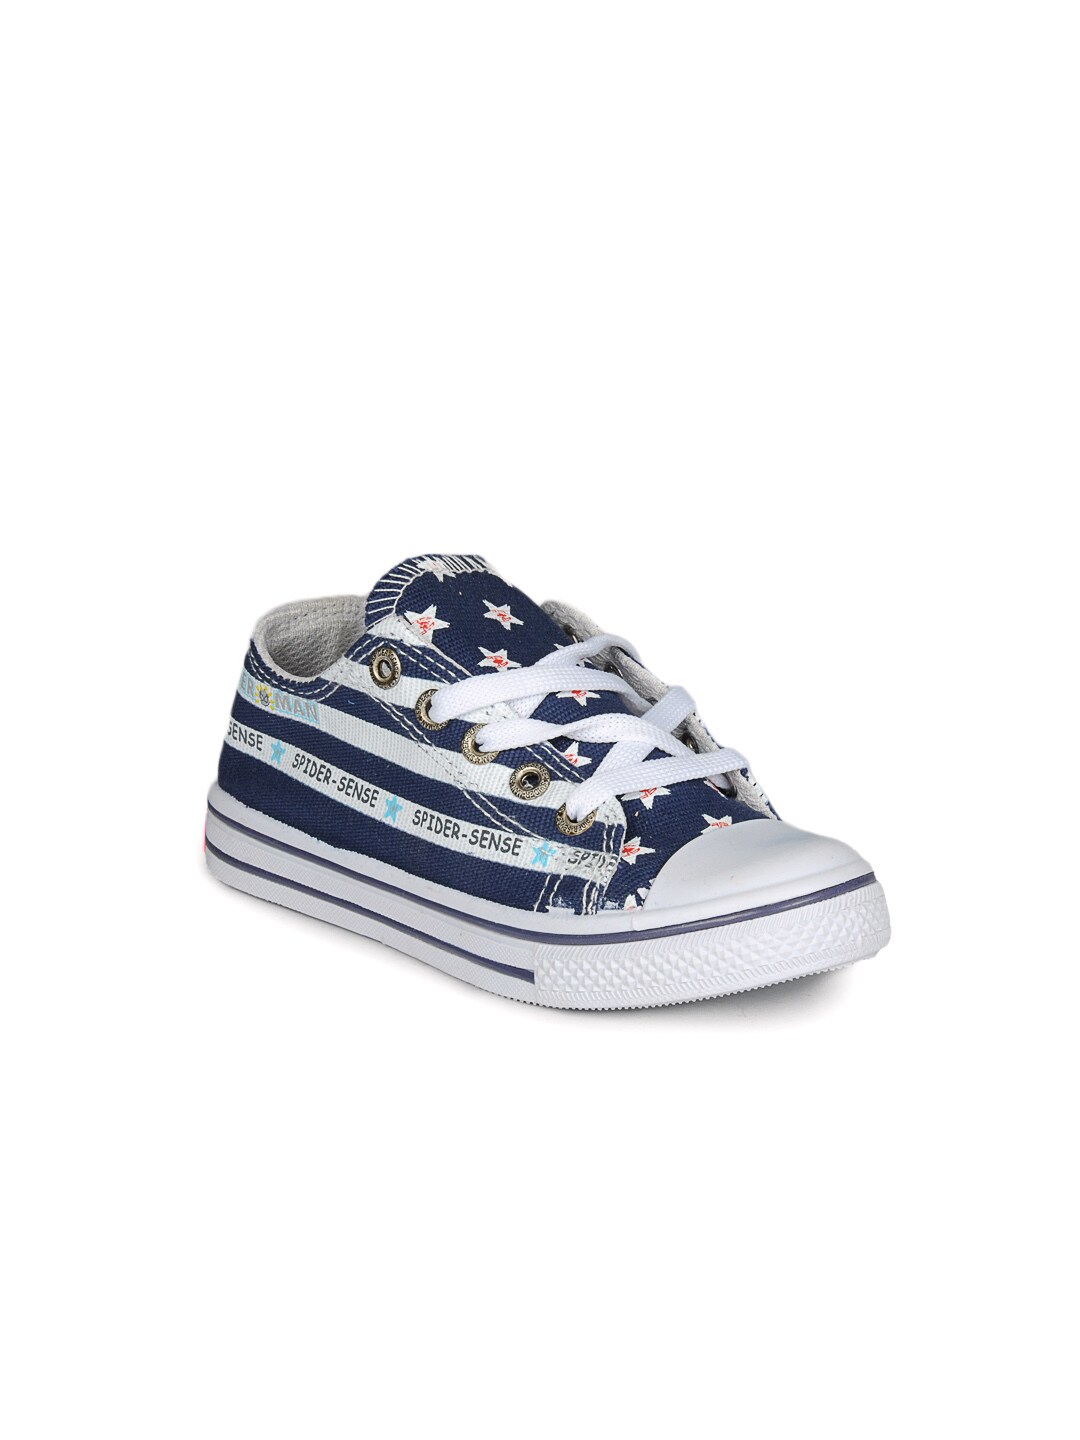 Marvel Navy Blue Boys Casual Shoes